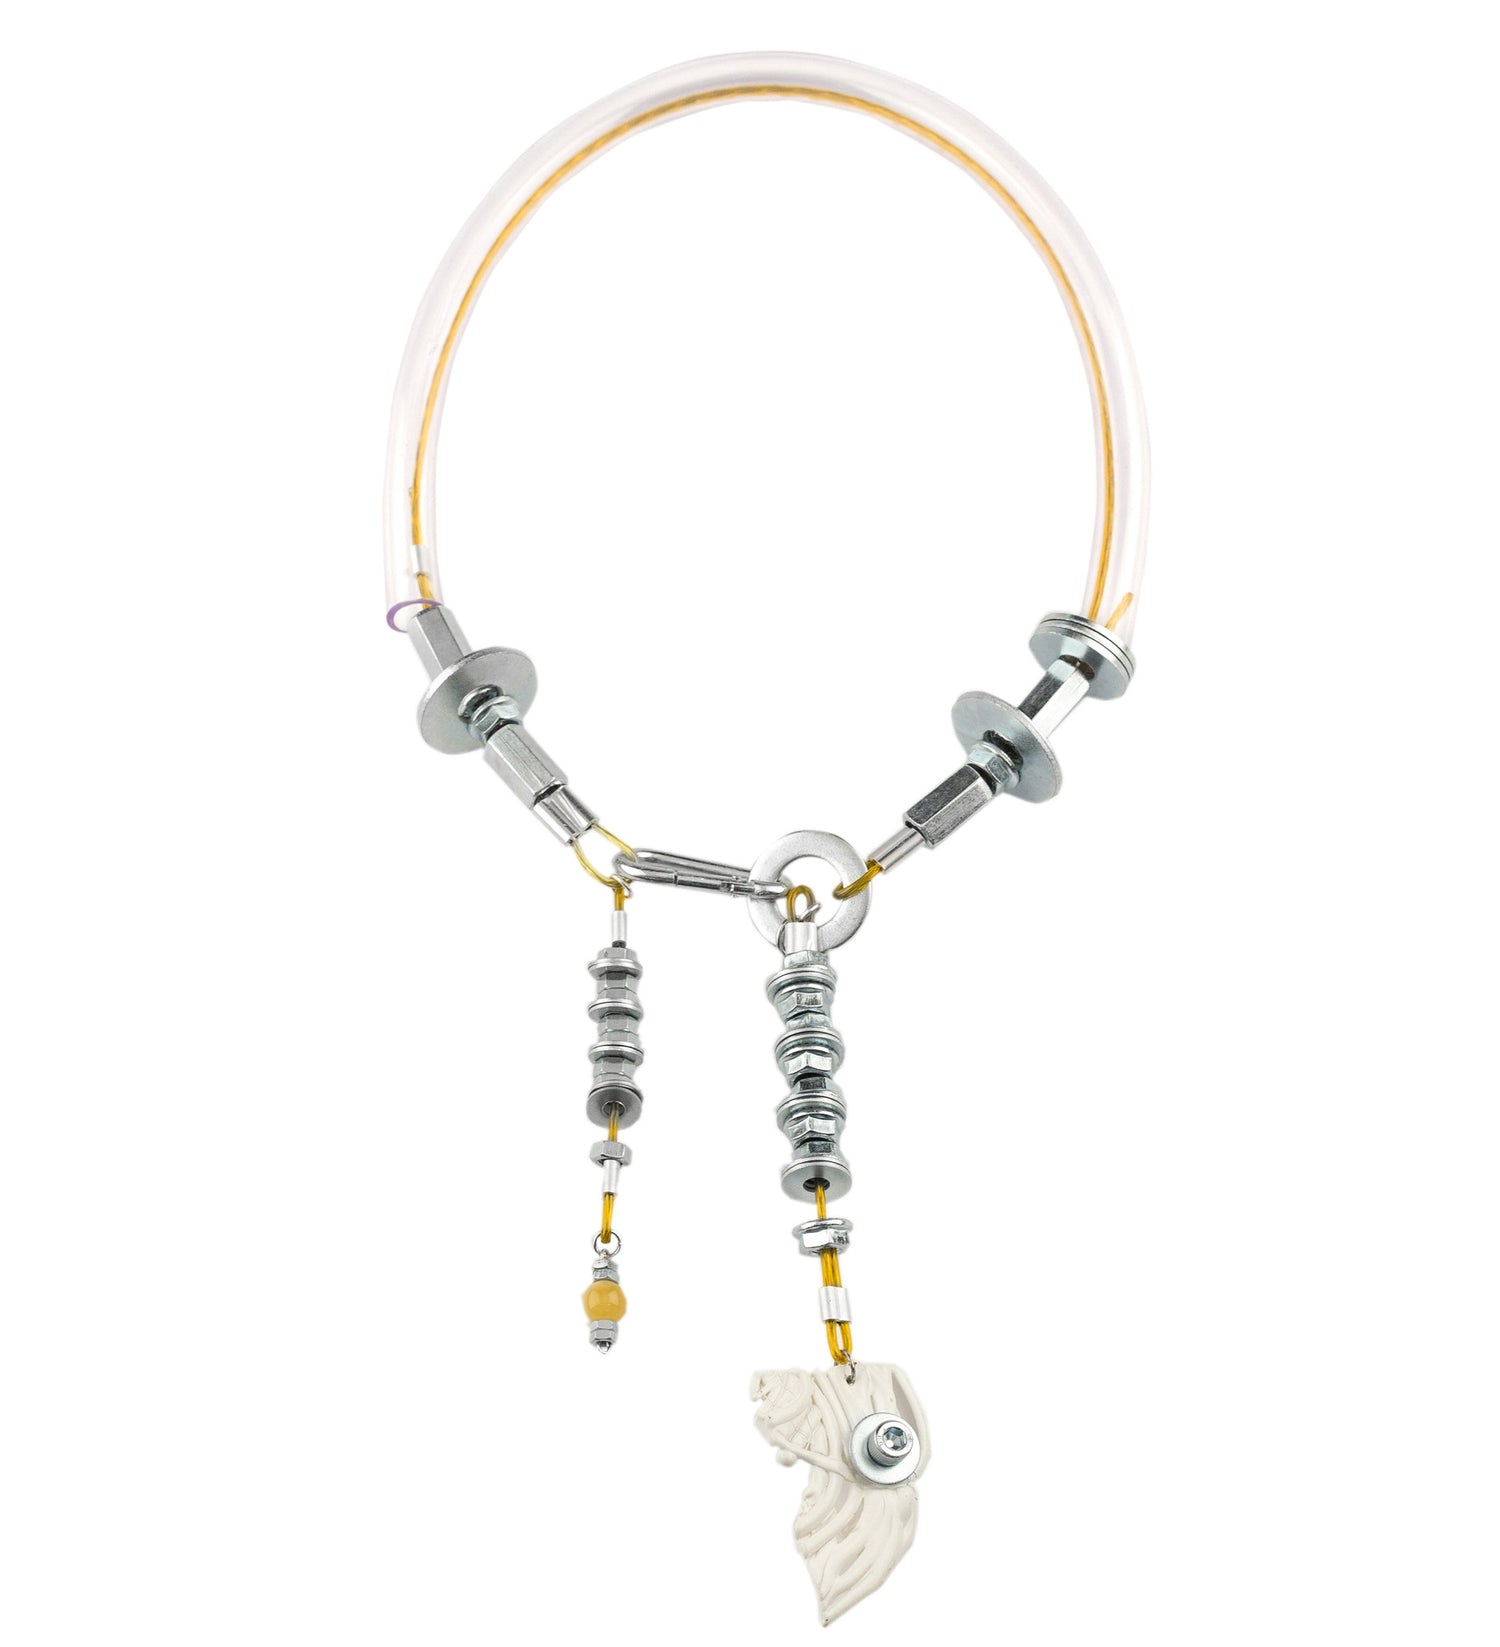 We craft the strongest base for all your experiences and keep them safely. So it consists of building materials such as screws, cable covered by plastic and transperant plastic tube. The white detail is also handmaded and carefuly made of melted plastic. Necklace is also decorated with Baltic Amber. Every Mellow piece has it's own life code, so do this one - N4/018. As well it means this product is one of the kind.